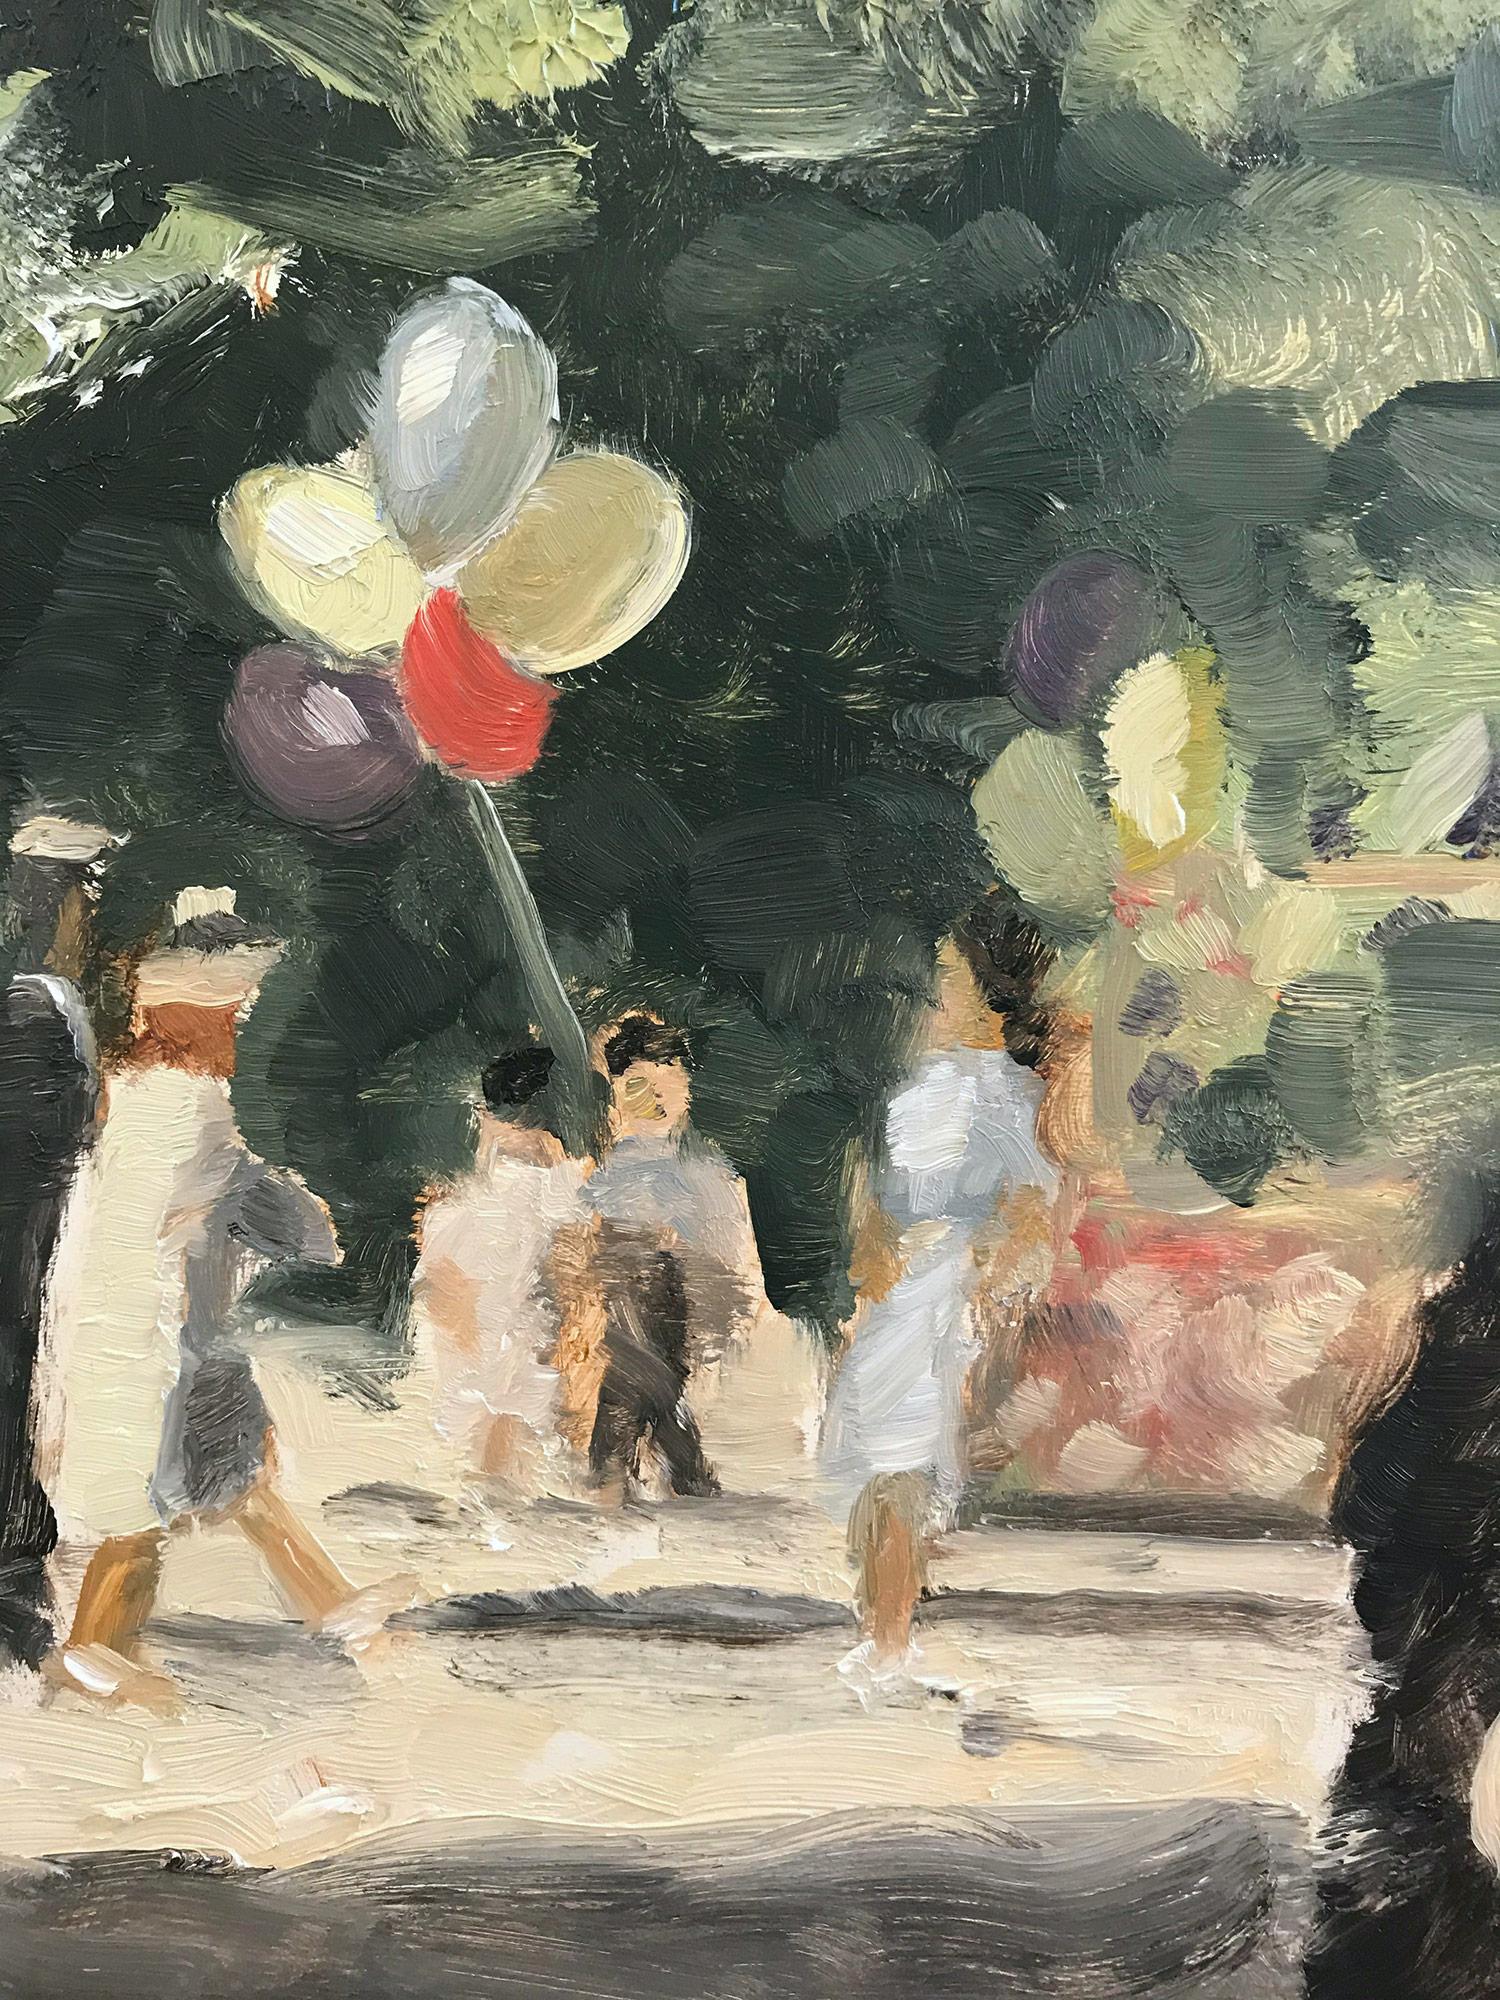 This painting depicts an impressionistic scene at the park Jardin De la Nouvelle near Gabriel and Marigny, at Champs-Élysées, Paris, France on a spring day, with beautiful brushwork and whimsical colors. The energy of the park is captured with life